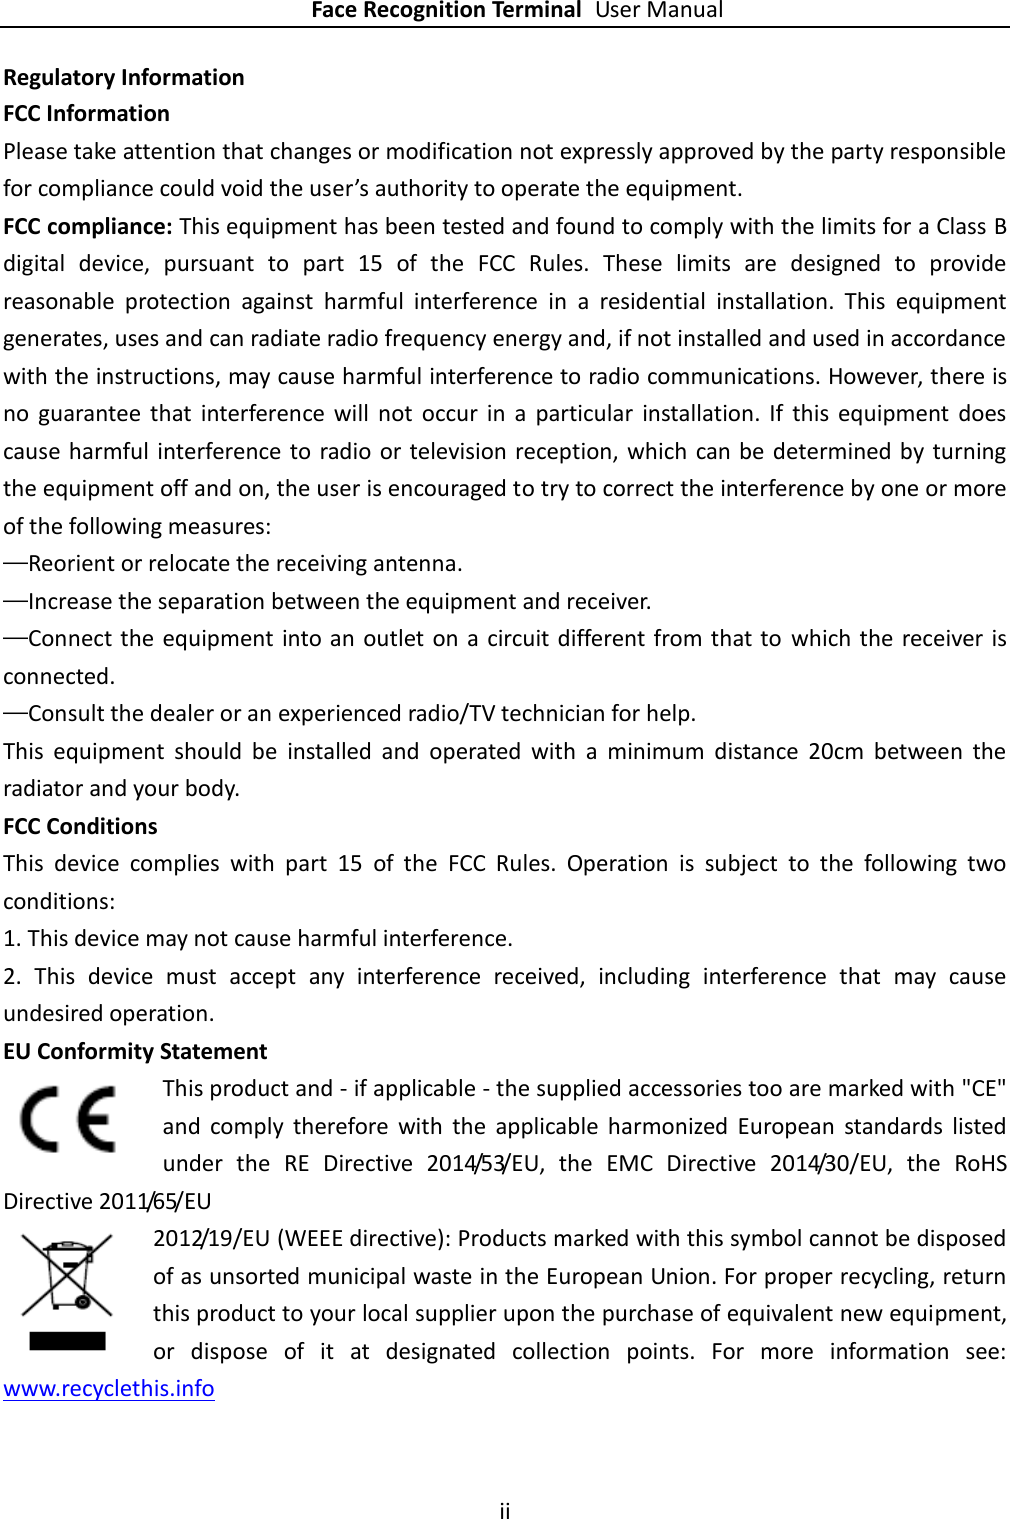 Page 3 of Hangzhou Hikvision Digital Technology K1T604 Face Recognition Terminal User Manual 